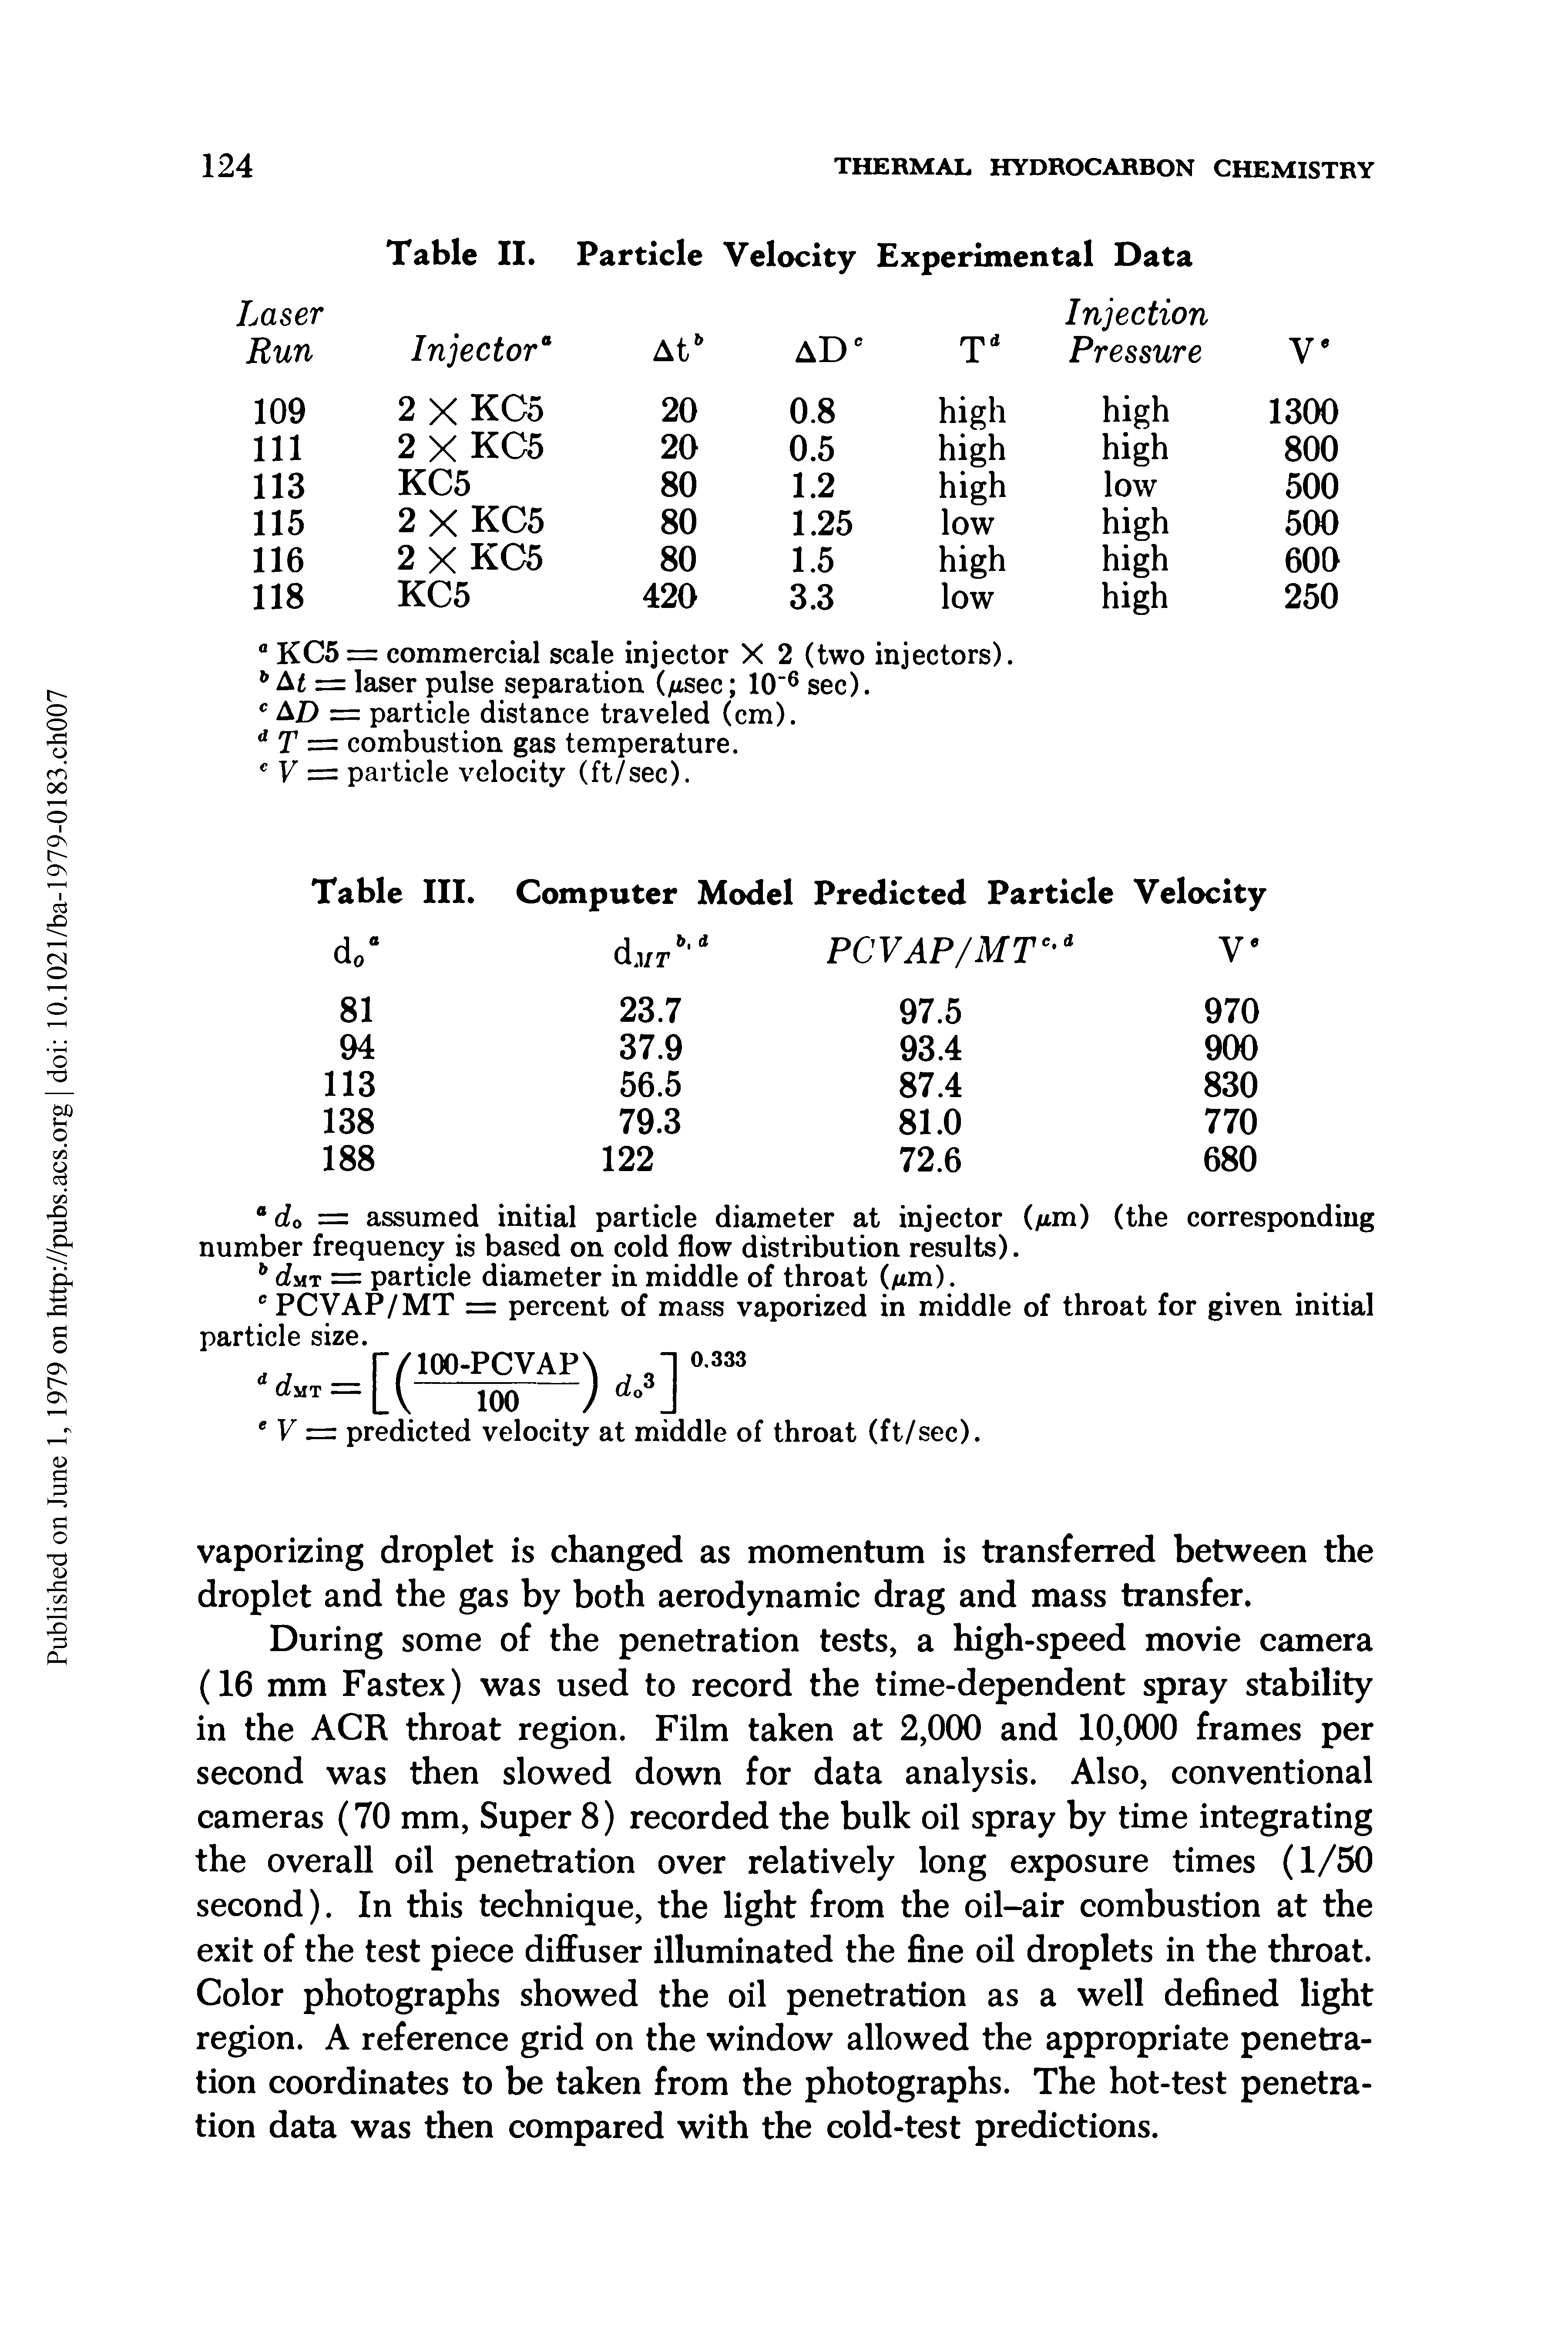 Table III. Computer Model Predicted Particle Velocity...